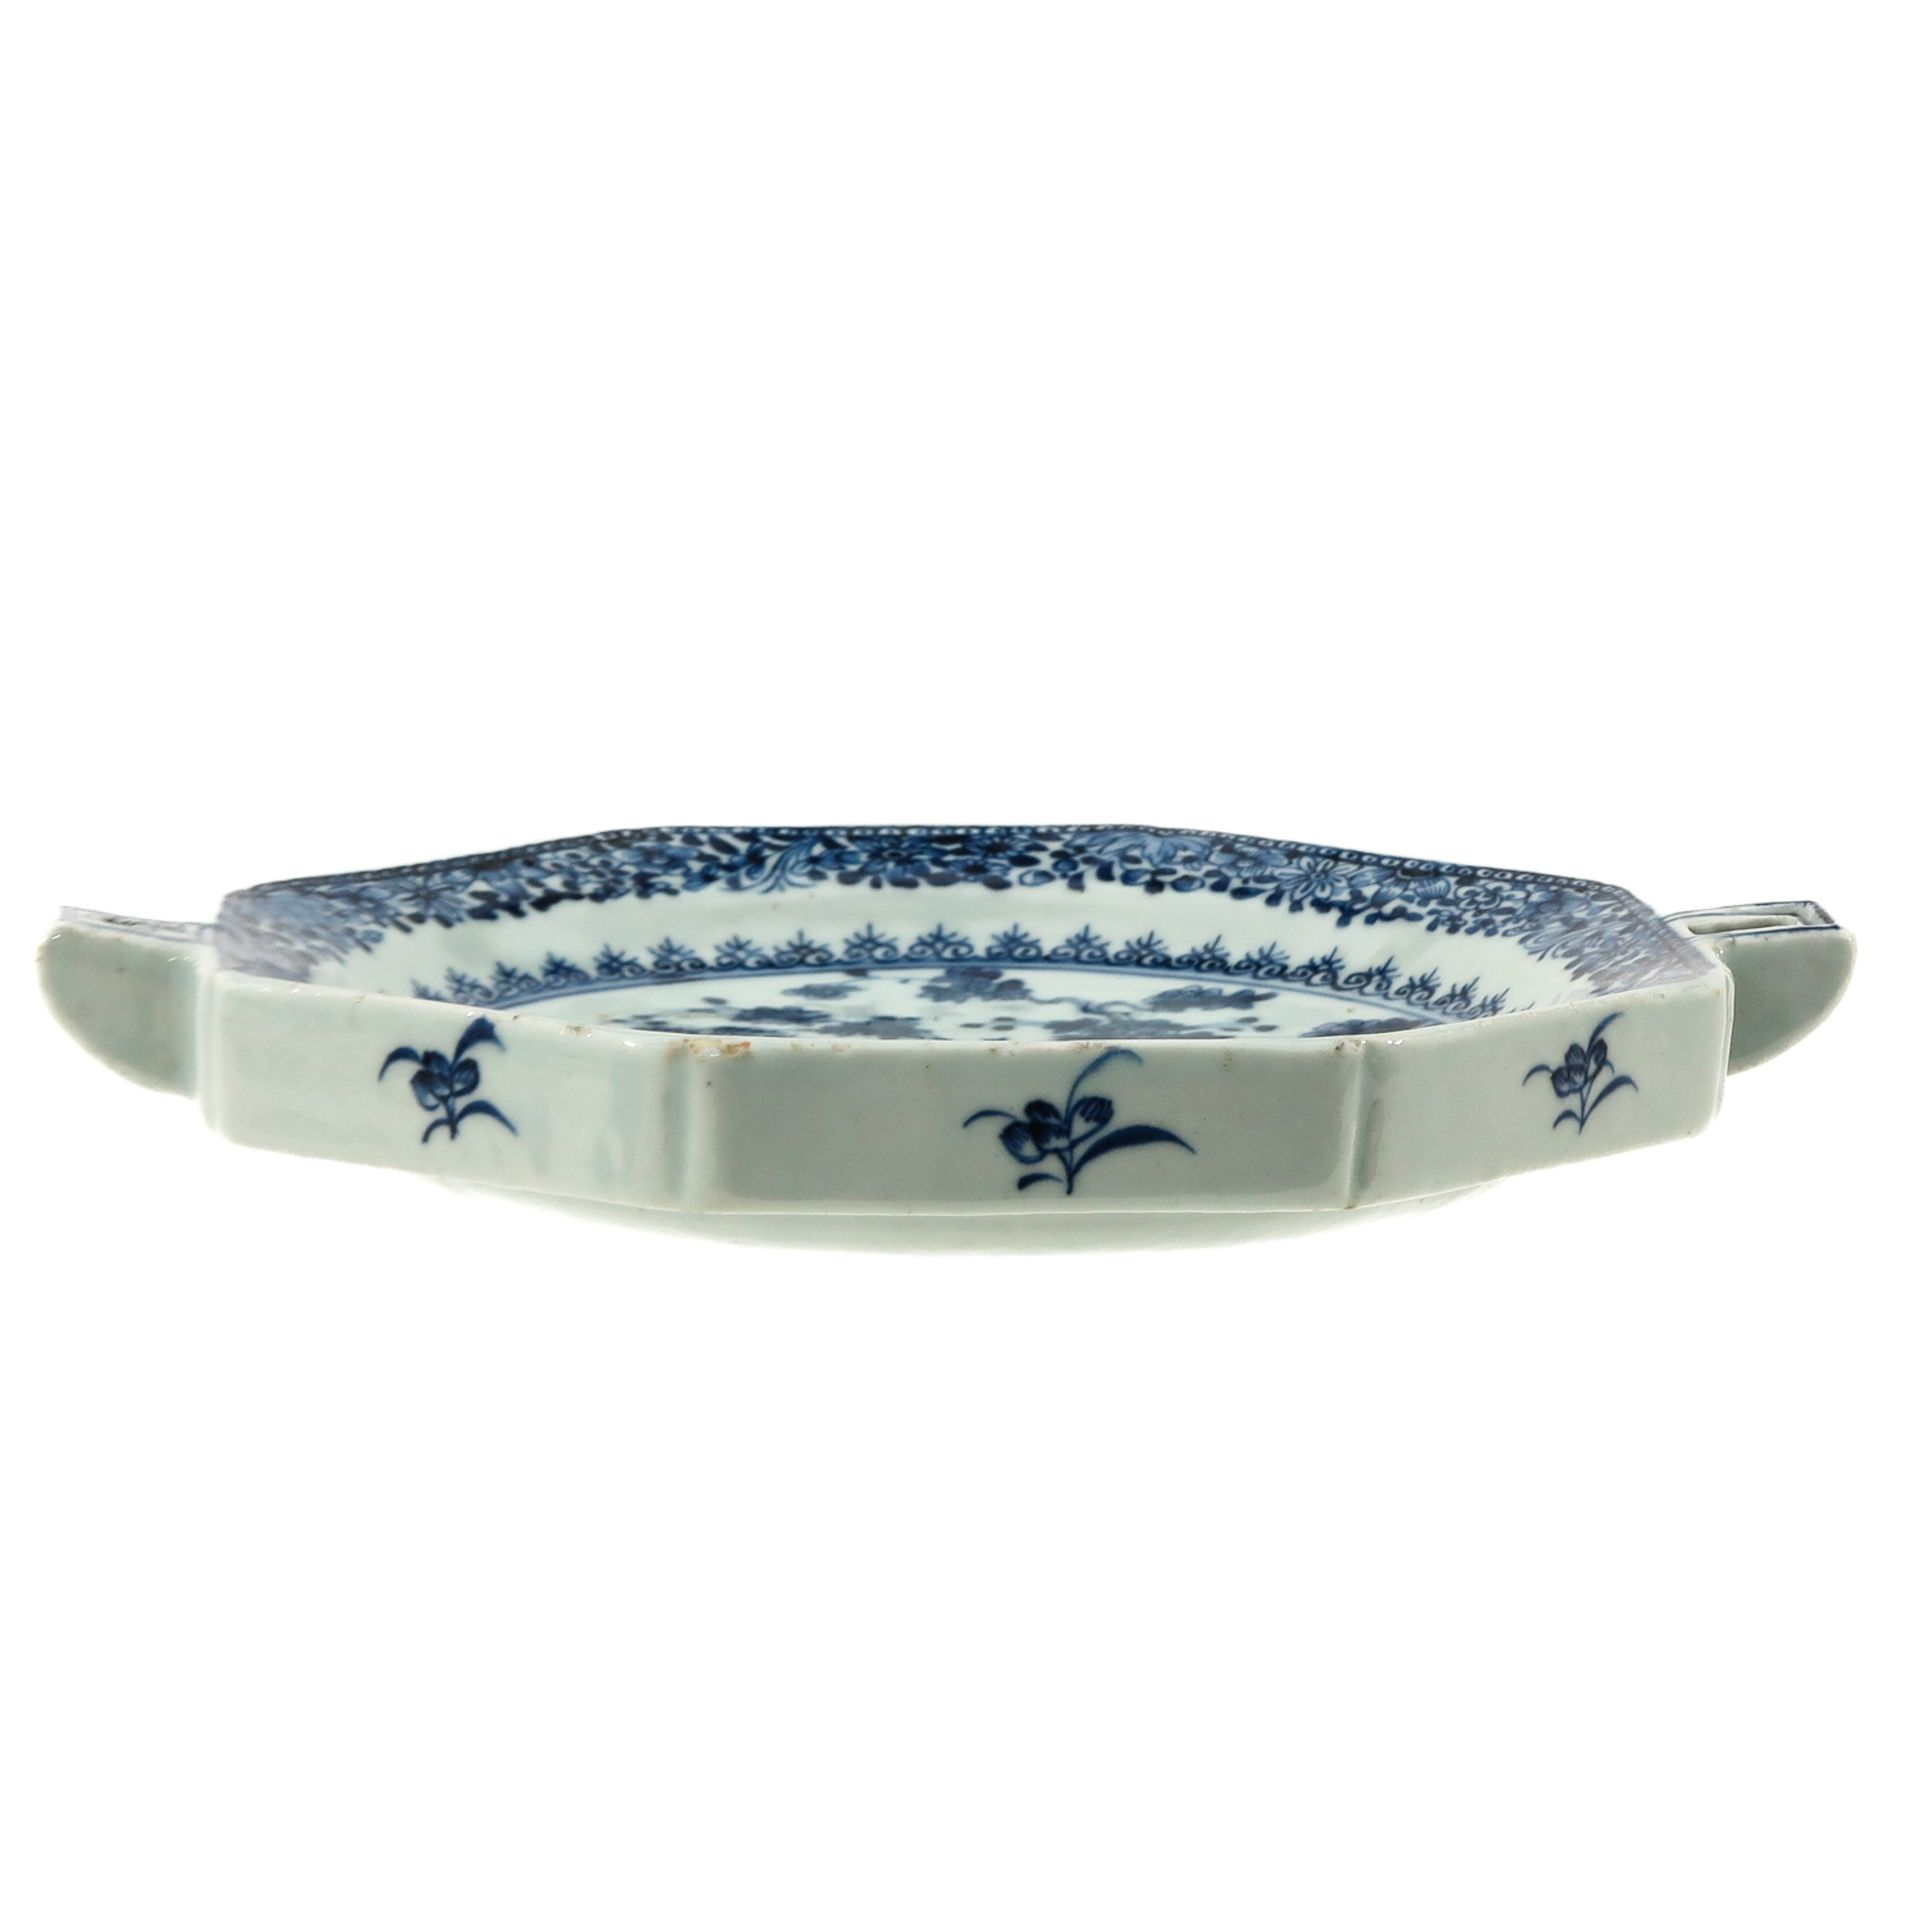 A Blue and White Warming Plate - Image 3 of 6